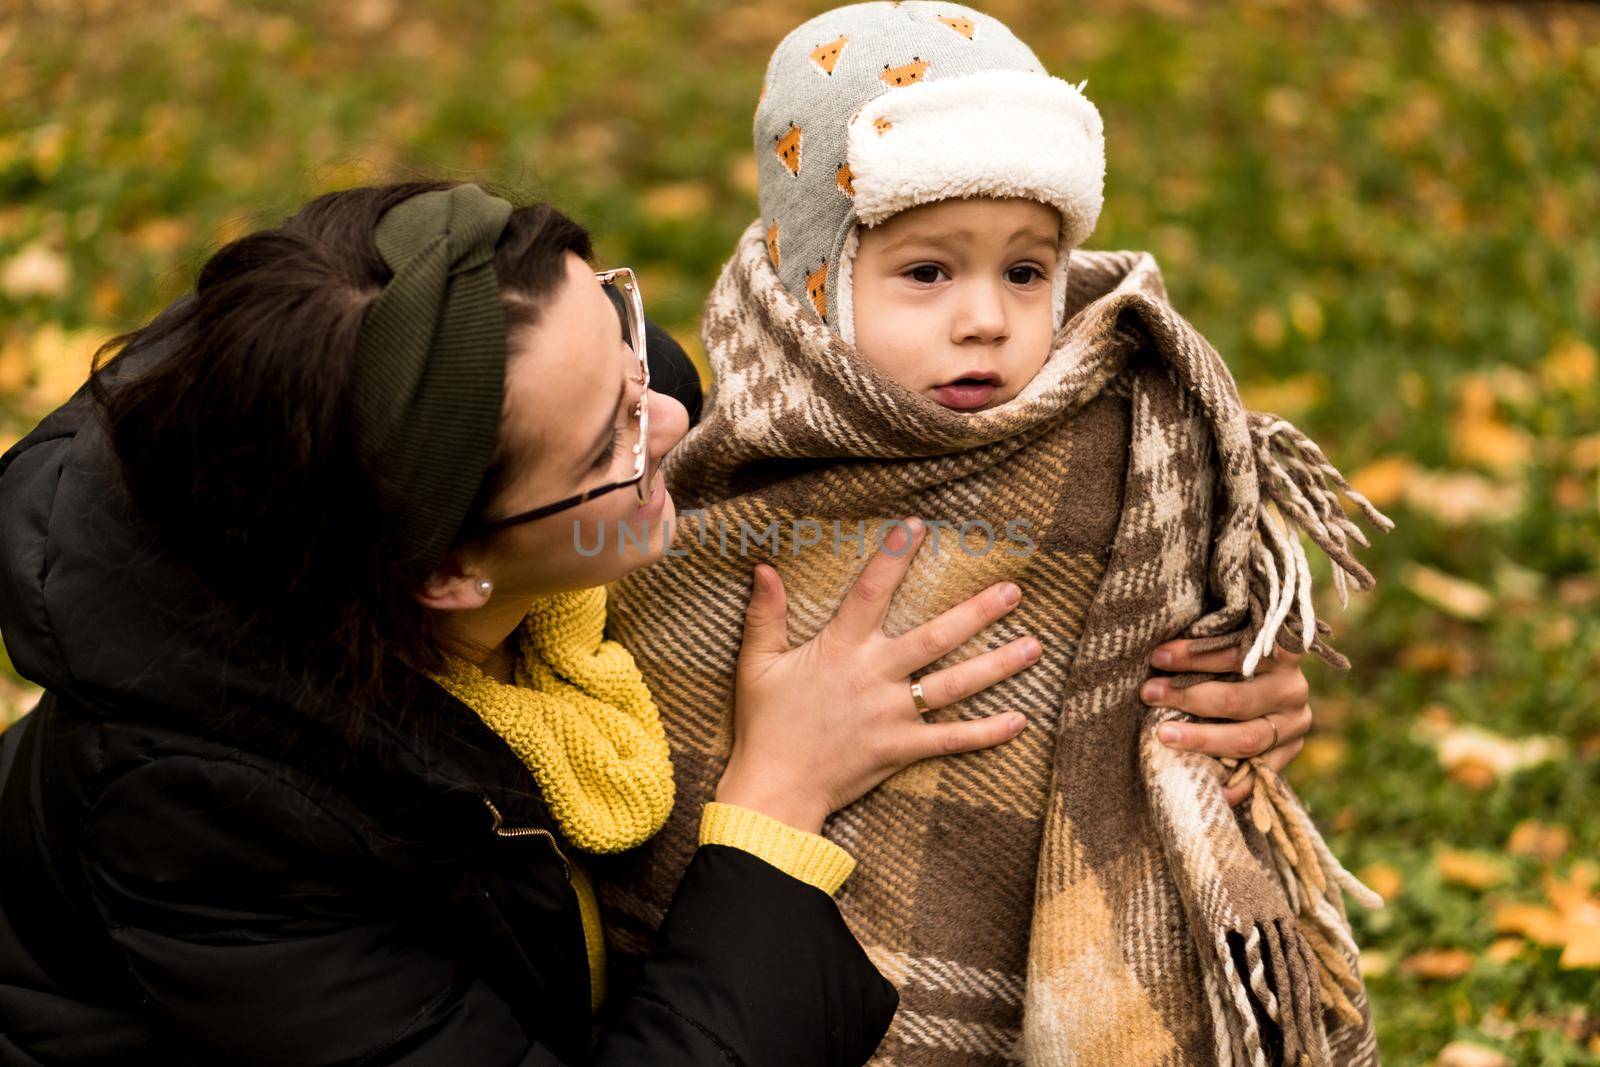 Young Woman Mom And Little Cute Preschool Minor Baby Boy In Orange Plaid At Yellow Fallen Leaves Nice Smiling Look At Camera In Cold Weather In Fall Park. Childhood, Family, Motherhood, Autumn Concept.